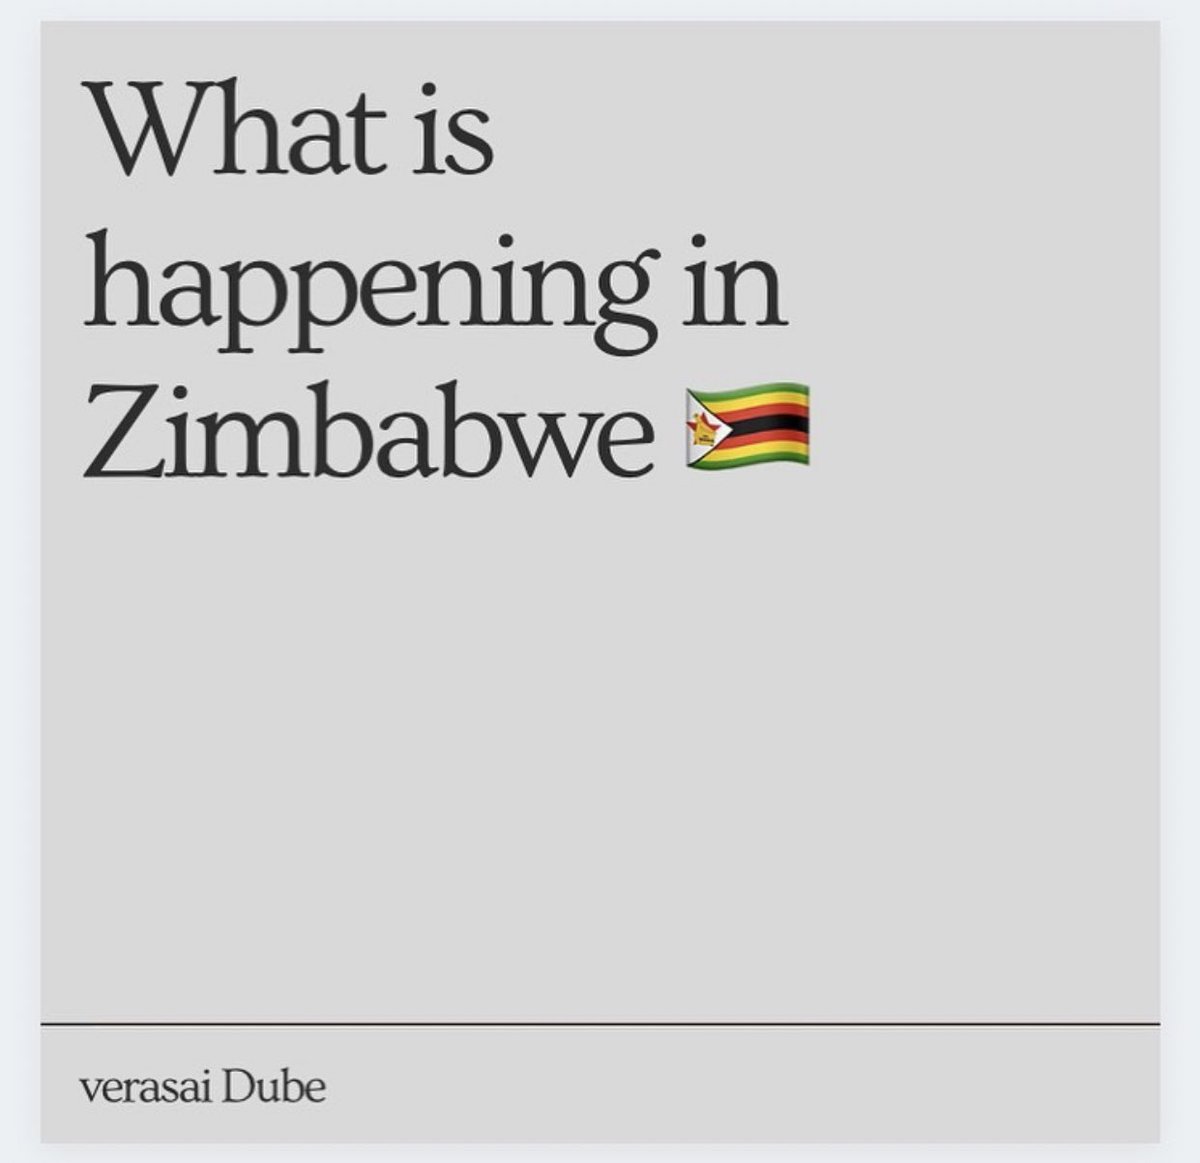 I’ve lived here for 11 years now, but Zimbabwe remains home to me. The 2017 toppling of Mugabe didn’t bring +ve change to my people. People are being brutalised & abducted for peacefully protesting corruption & violence! PLEASE retweet for awareness  #ZimbabweanLivesMatter 